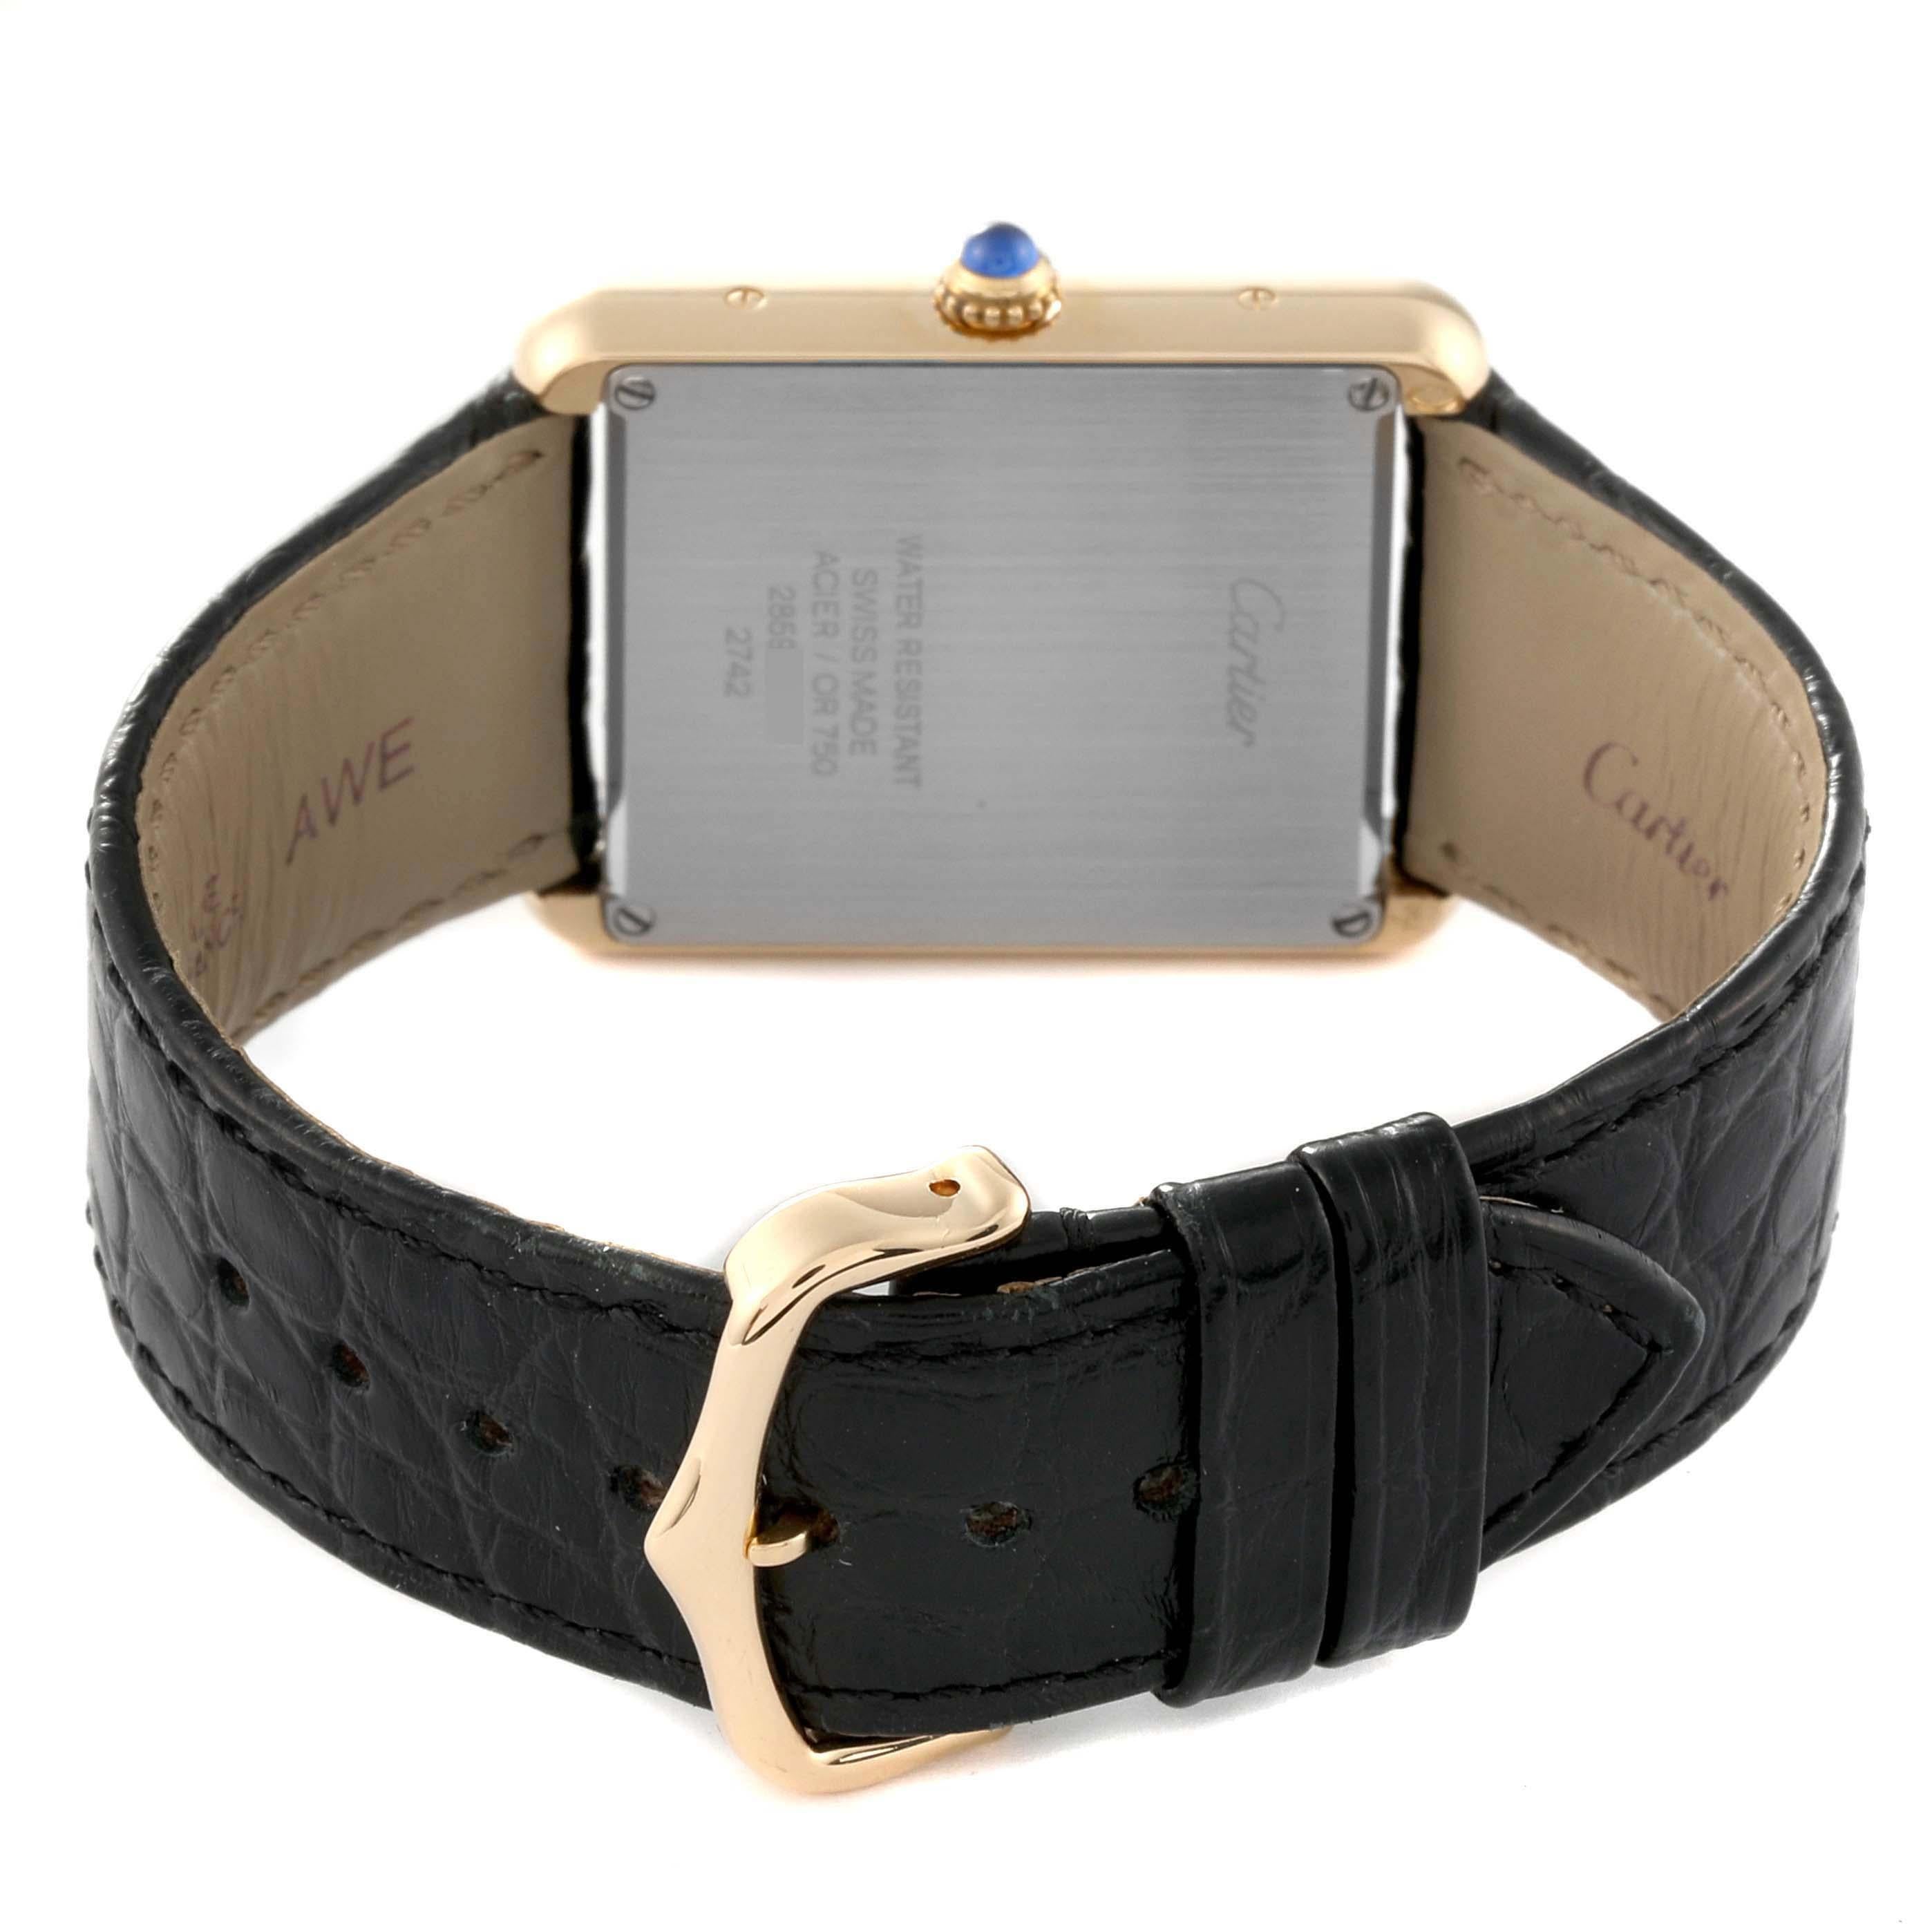 Cartier Tank Solo Yellow Gold Steel Black Strap Mens Watch W1018855. Quartz movement. 18k yellow gold case 34.0 x 27.0 mm. Stainless steel caseback. Circular grained crown set with a blue spinel cabochon. . Scratch resistant sapphire crystal. Silver